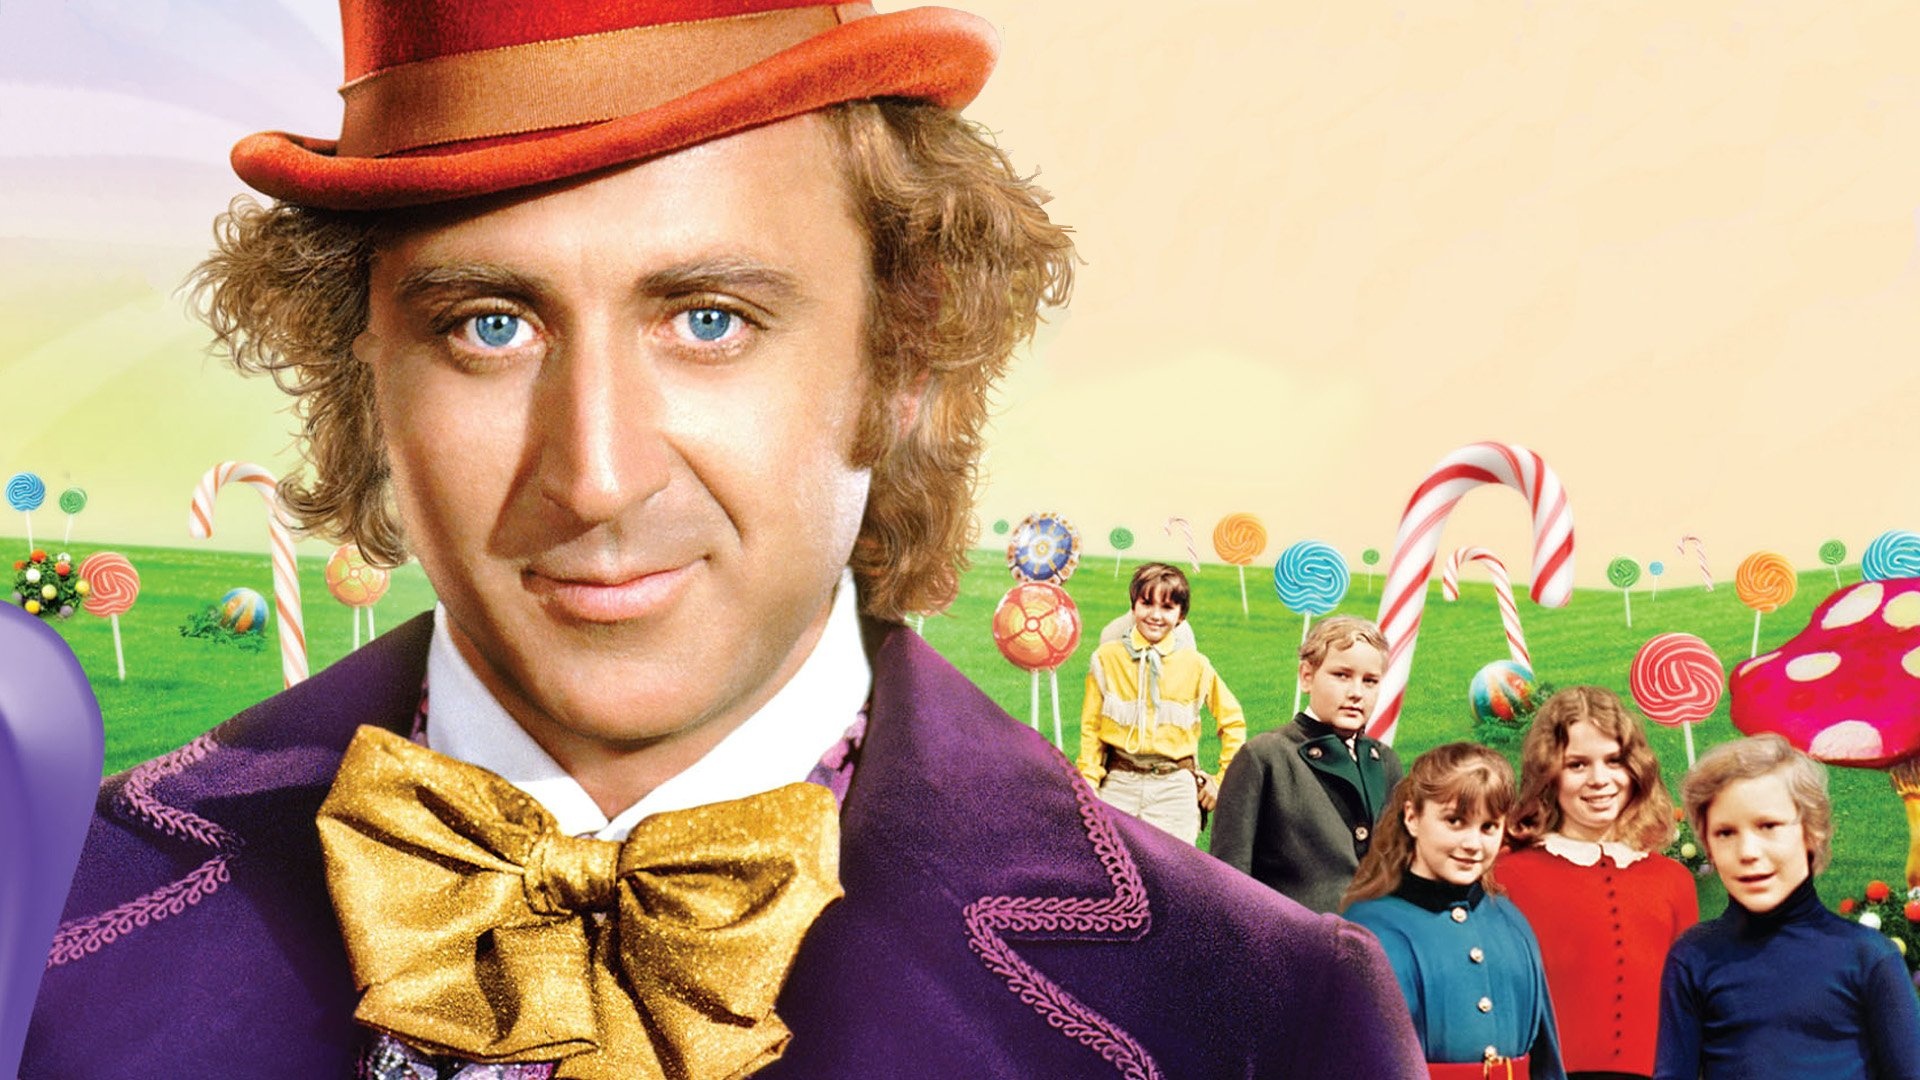 Willy Wonka, Willy Wonka and the Chocolate Factory, Adventure, Family comedy, 1920x1080 Full HD Desktop